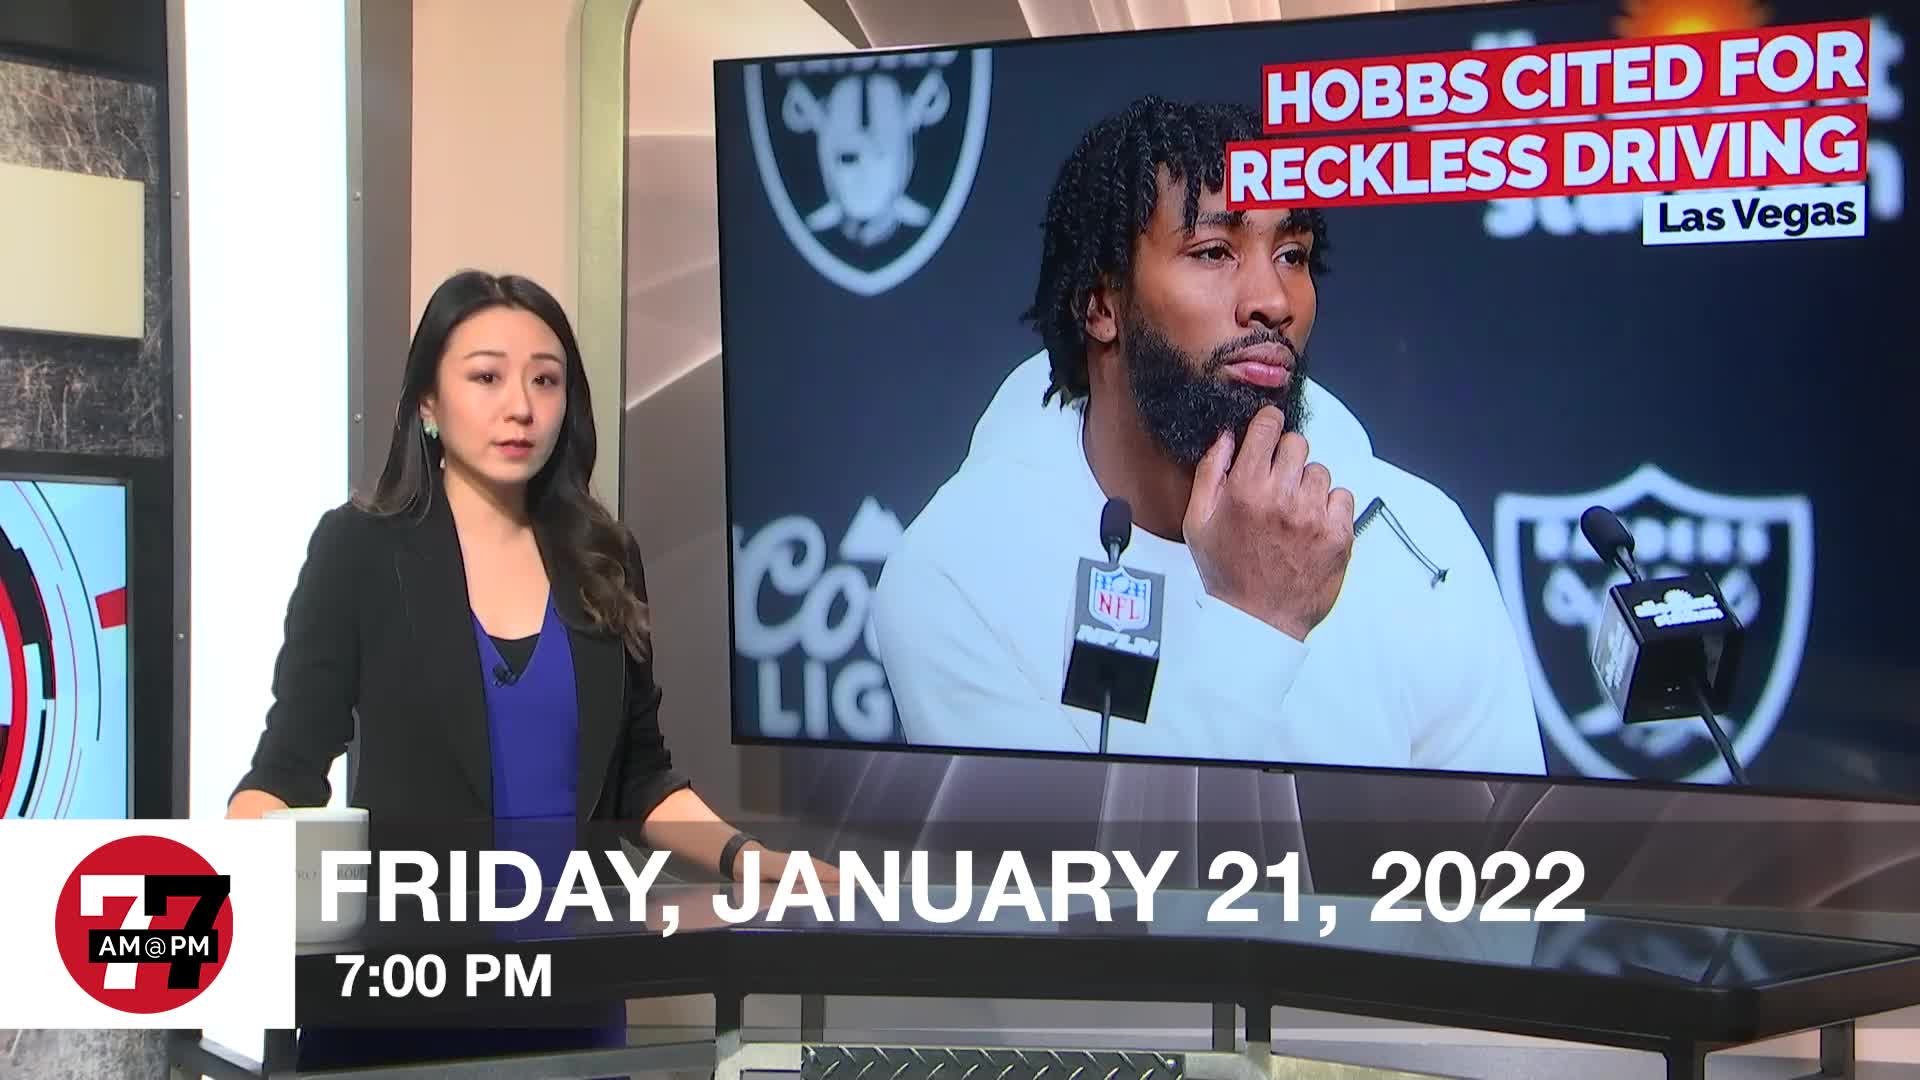 7@7PM Raiders' Hobbs Cited for Reckless Driving